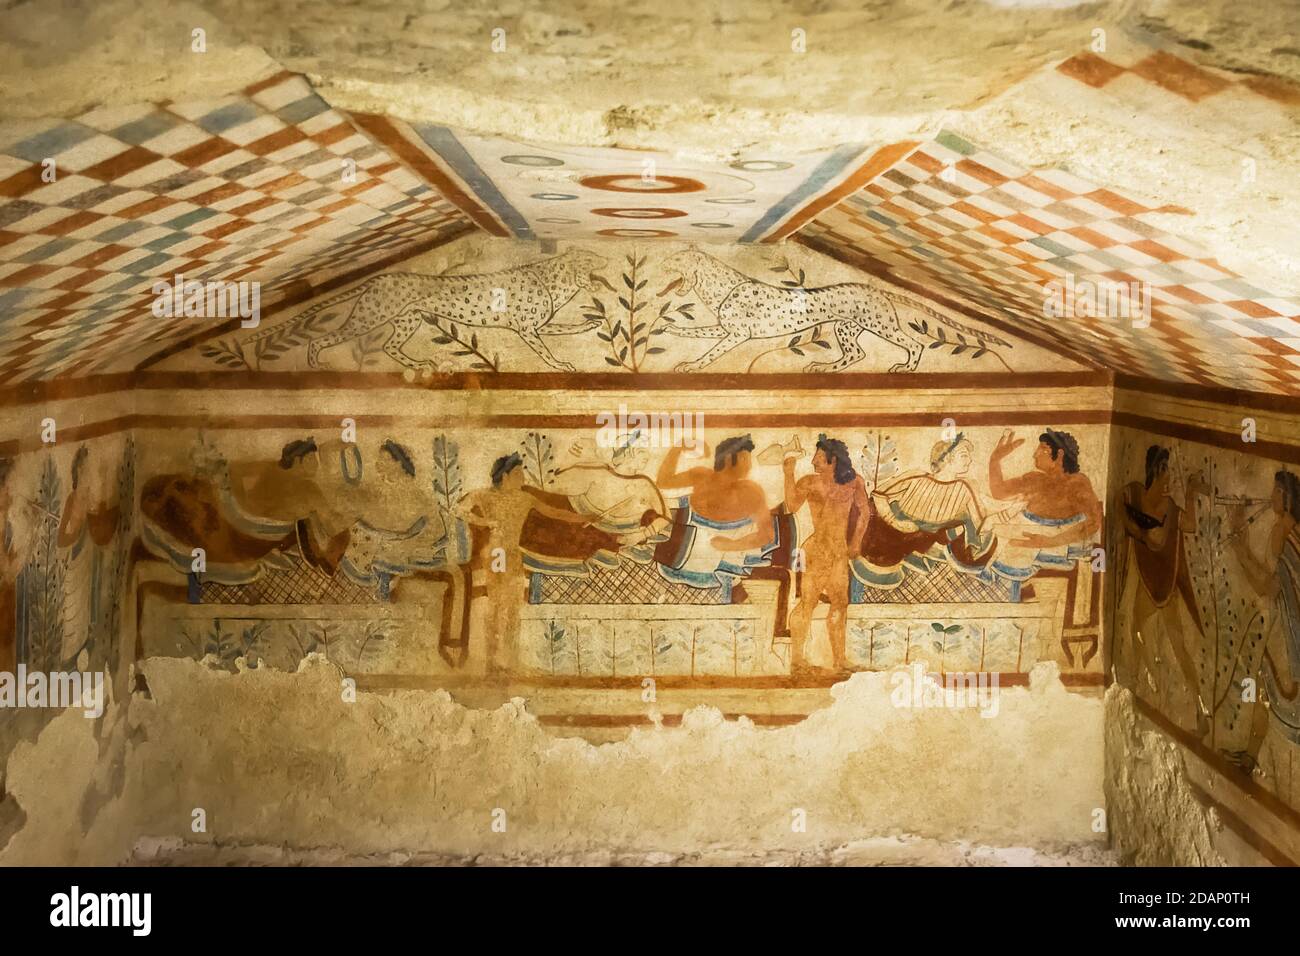 Tarquinia, Italy - 18 september 2020: Tomb of leopards, one of the tombs of the Etruscan necropolis of Tarquinia Stock Photo